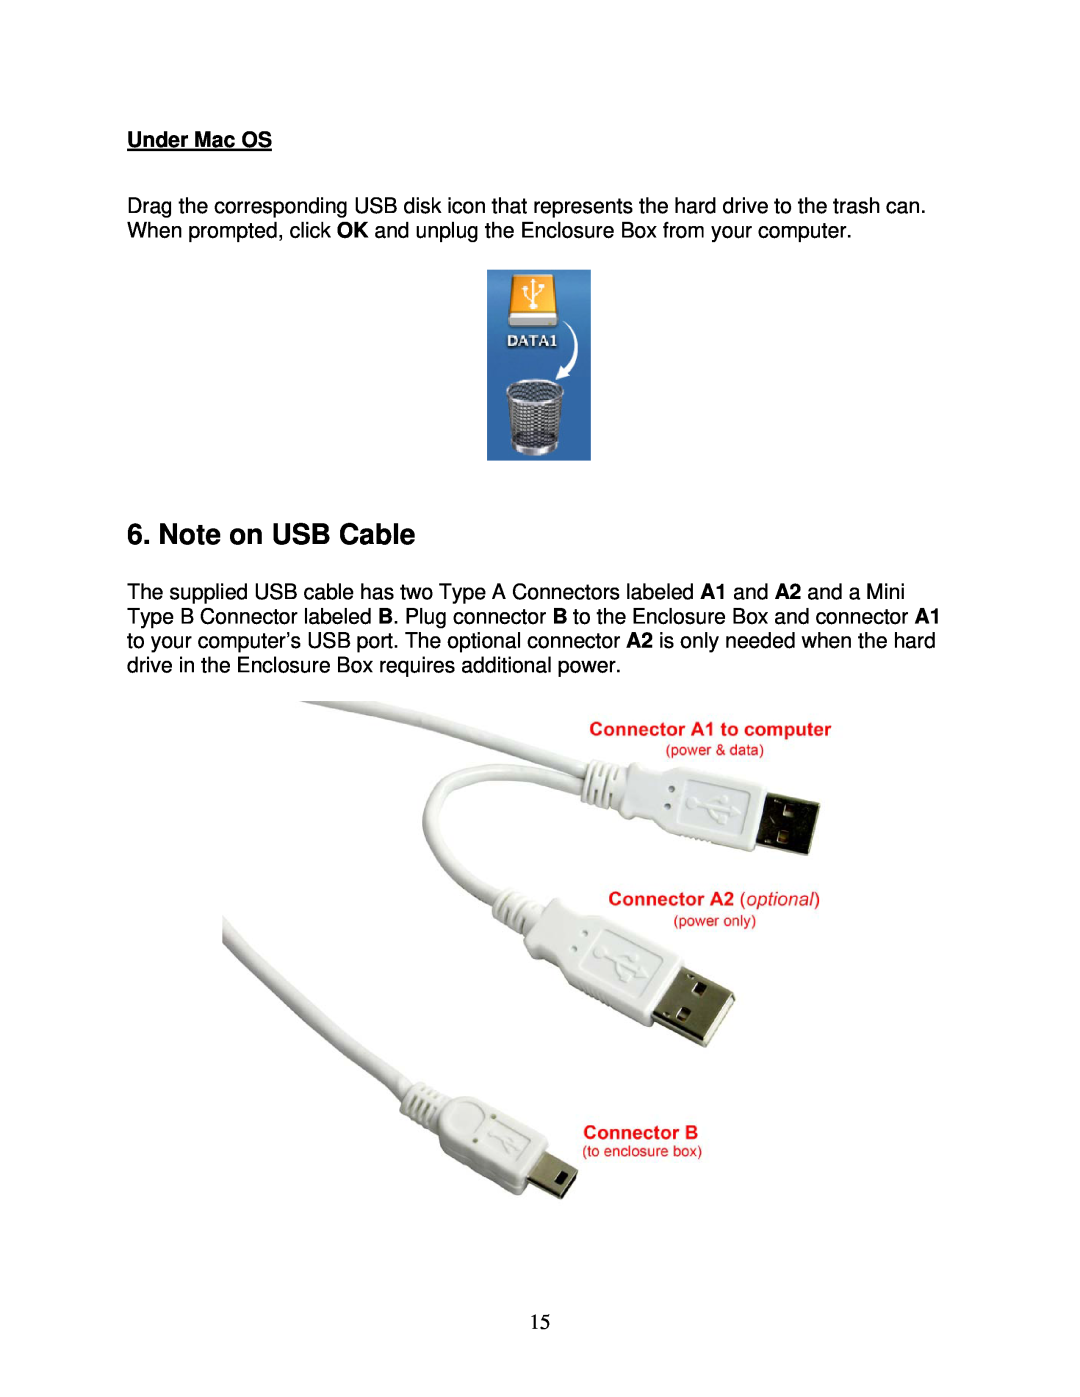 Airlink101 AEN-U25W user manual Note on USB Cable, Under Mac OS 